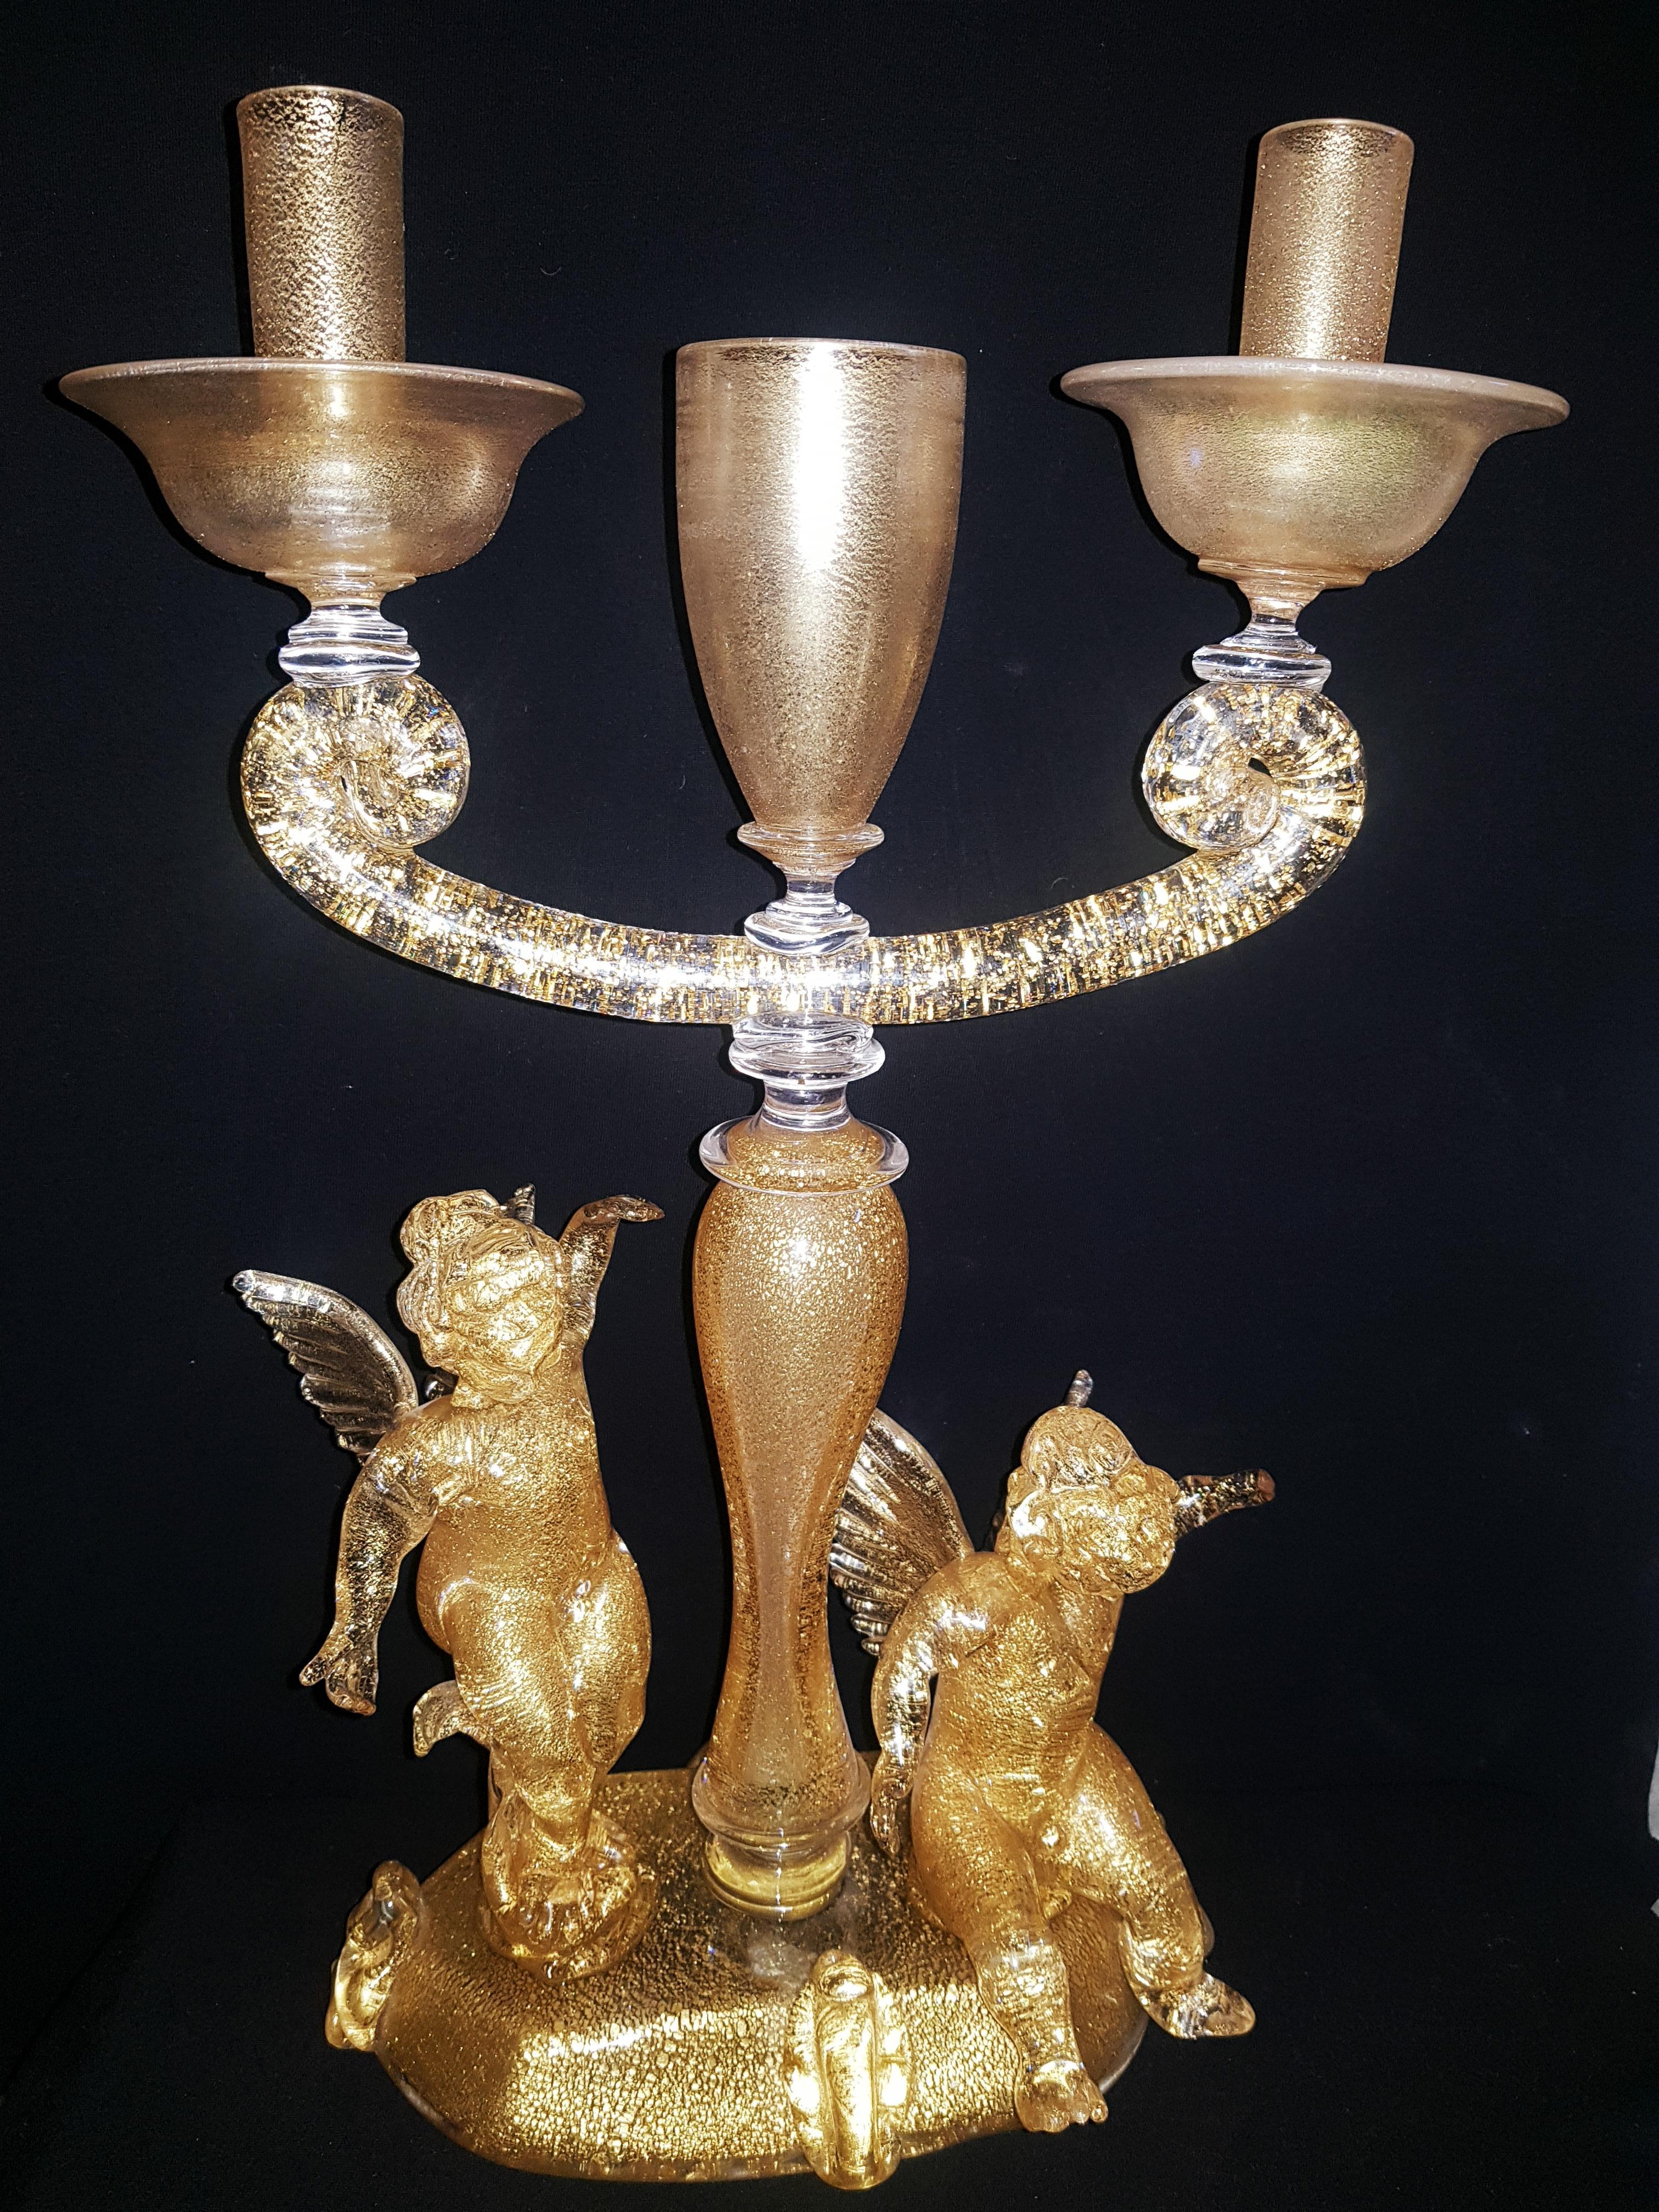 Beautiful vitange murano glass large candle holder with gold leaf, by Ermanno Nason for Cenedese years 1963-72',brilliant condition, museum quality.